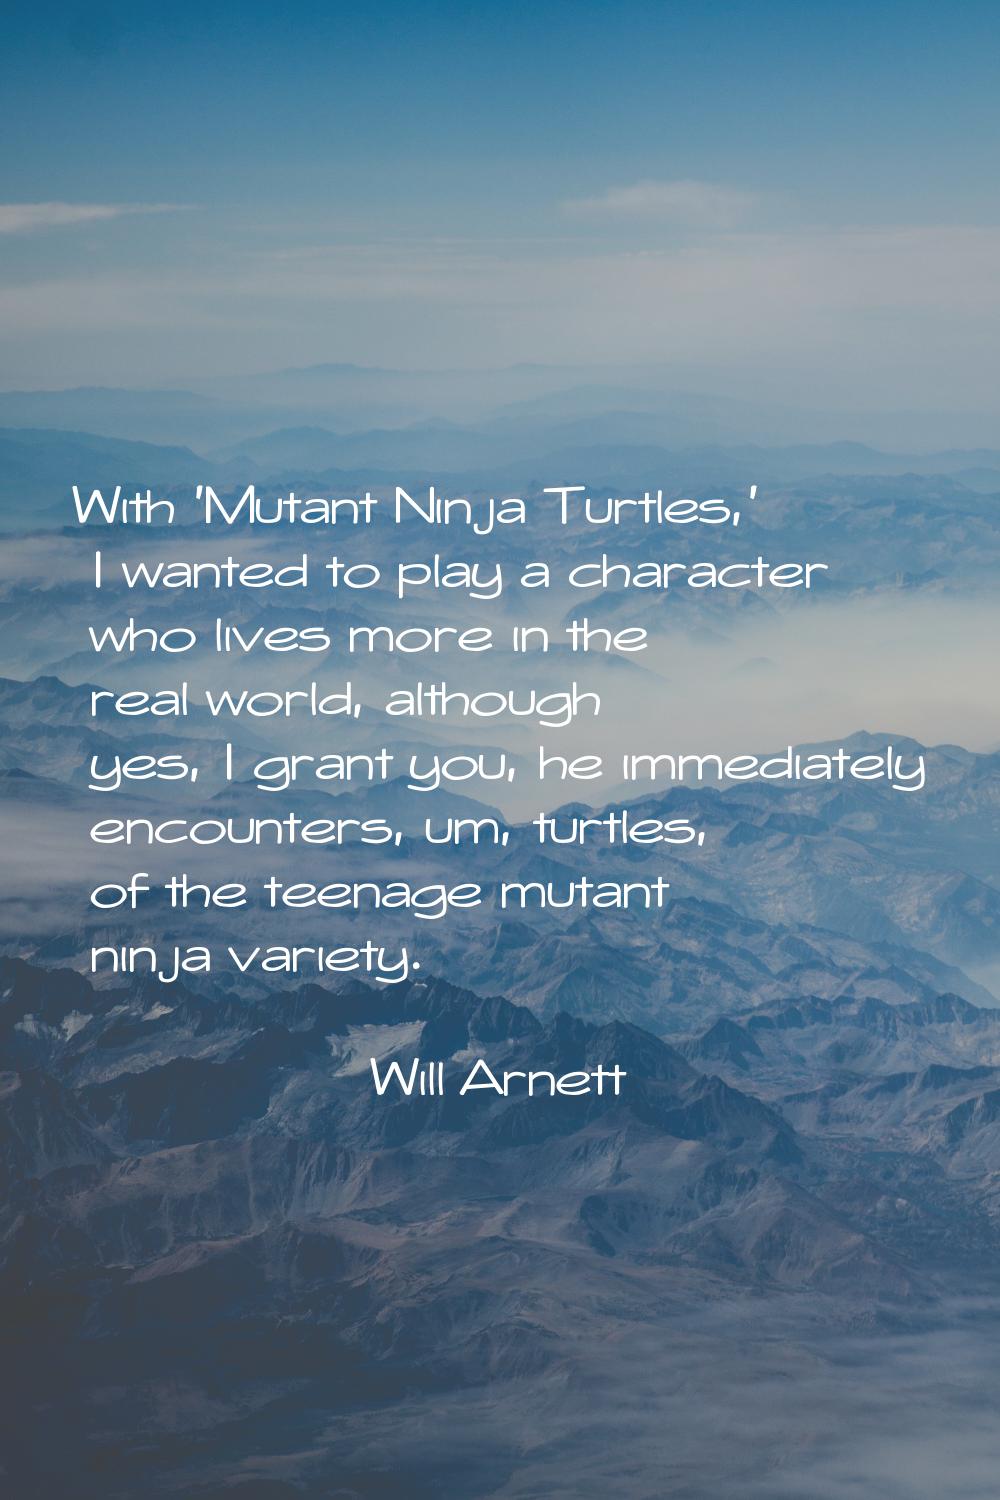 With 'Mutant Ninja Turtles,' I wanted to play a character who lives more in the real world, althoug